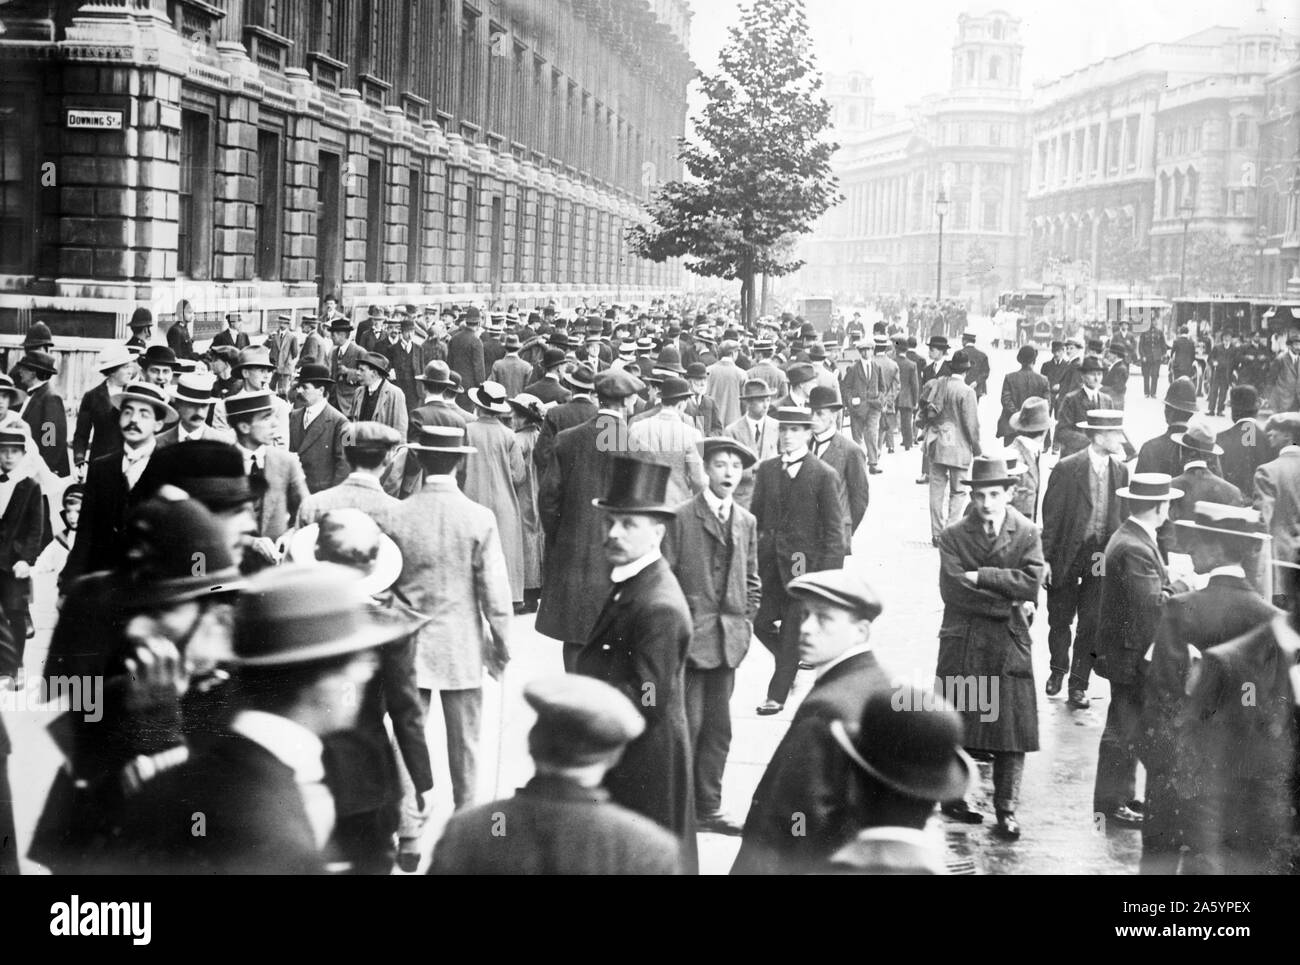 Announcement of World War One commencement as a crowd gathers near Downing St., London 1914 Stock Photo